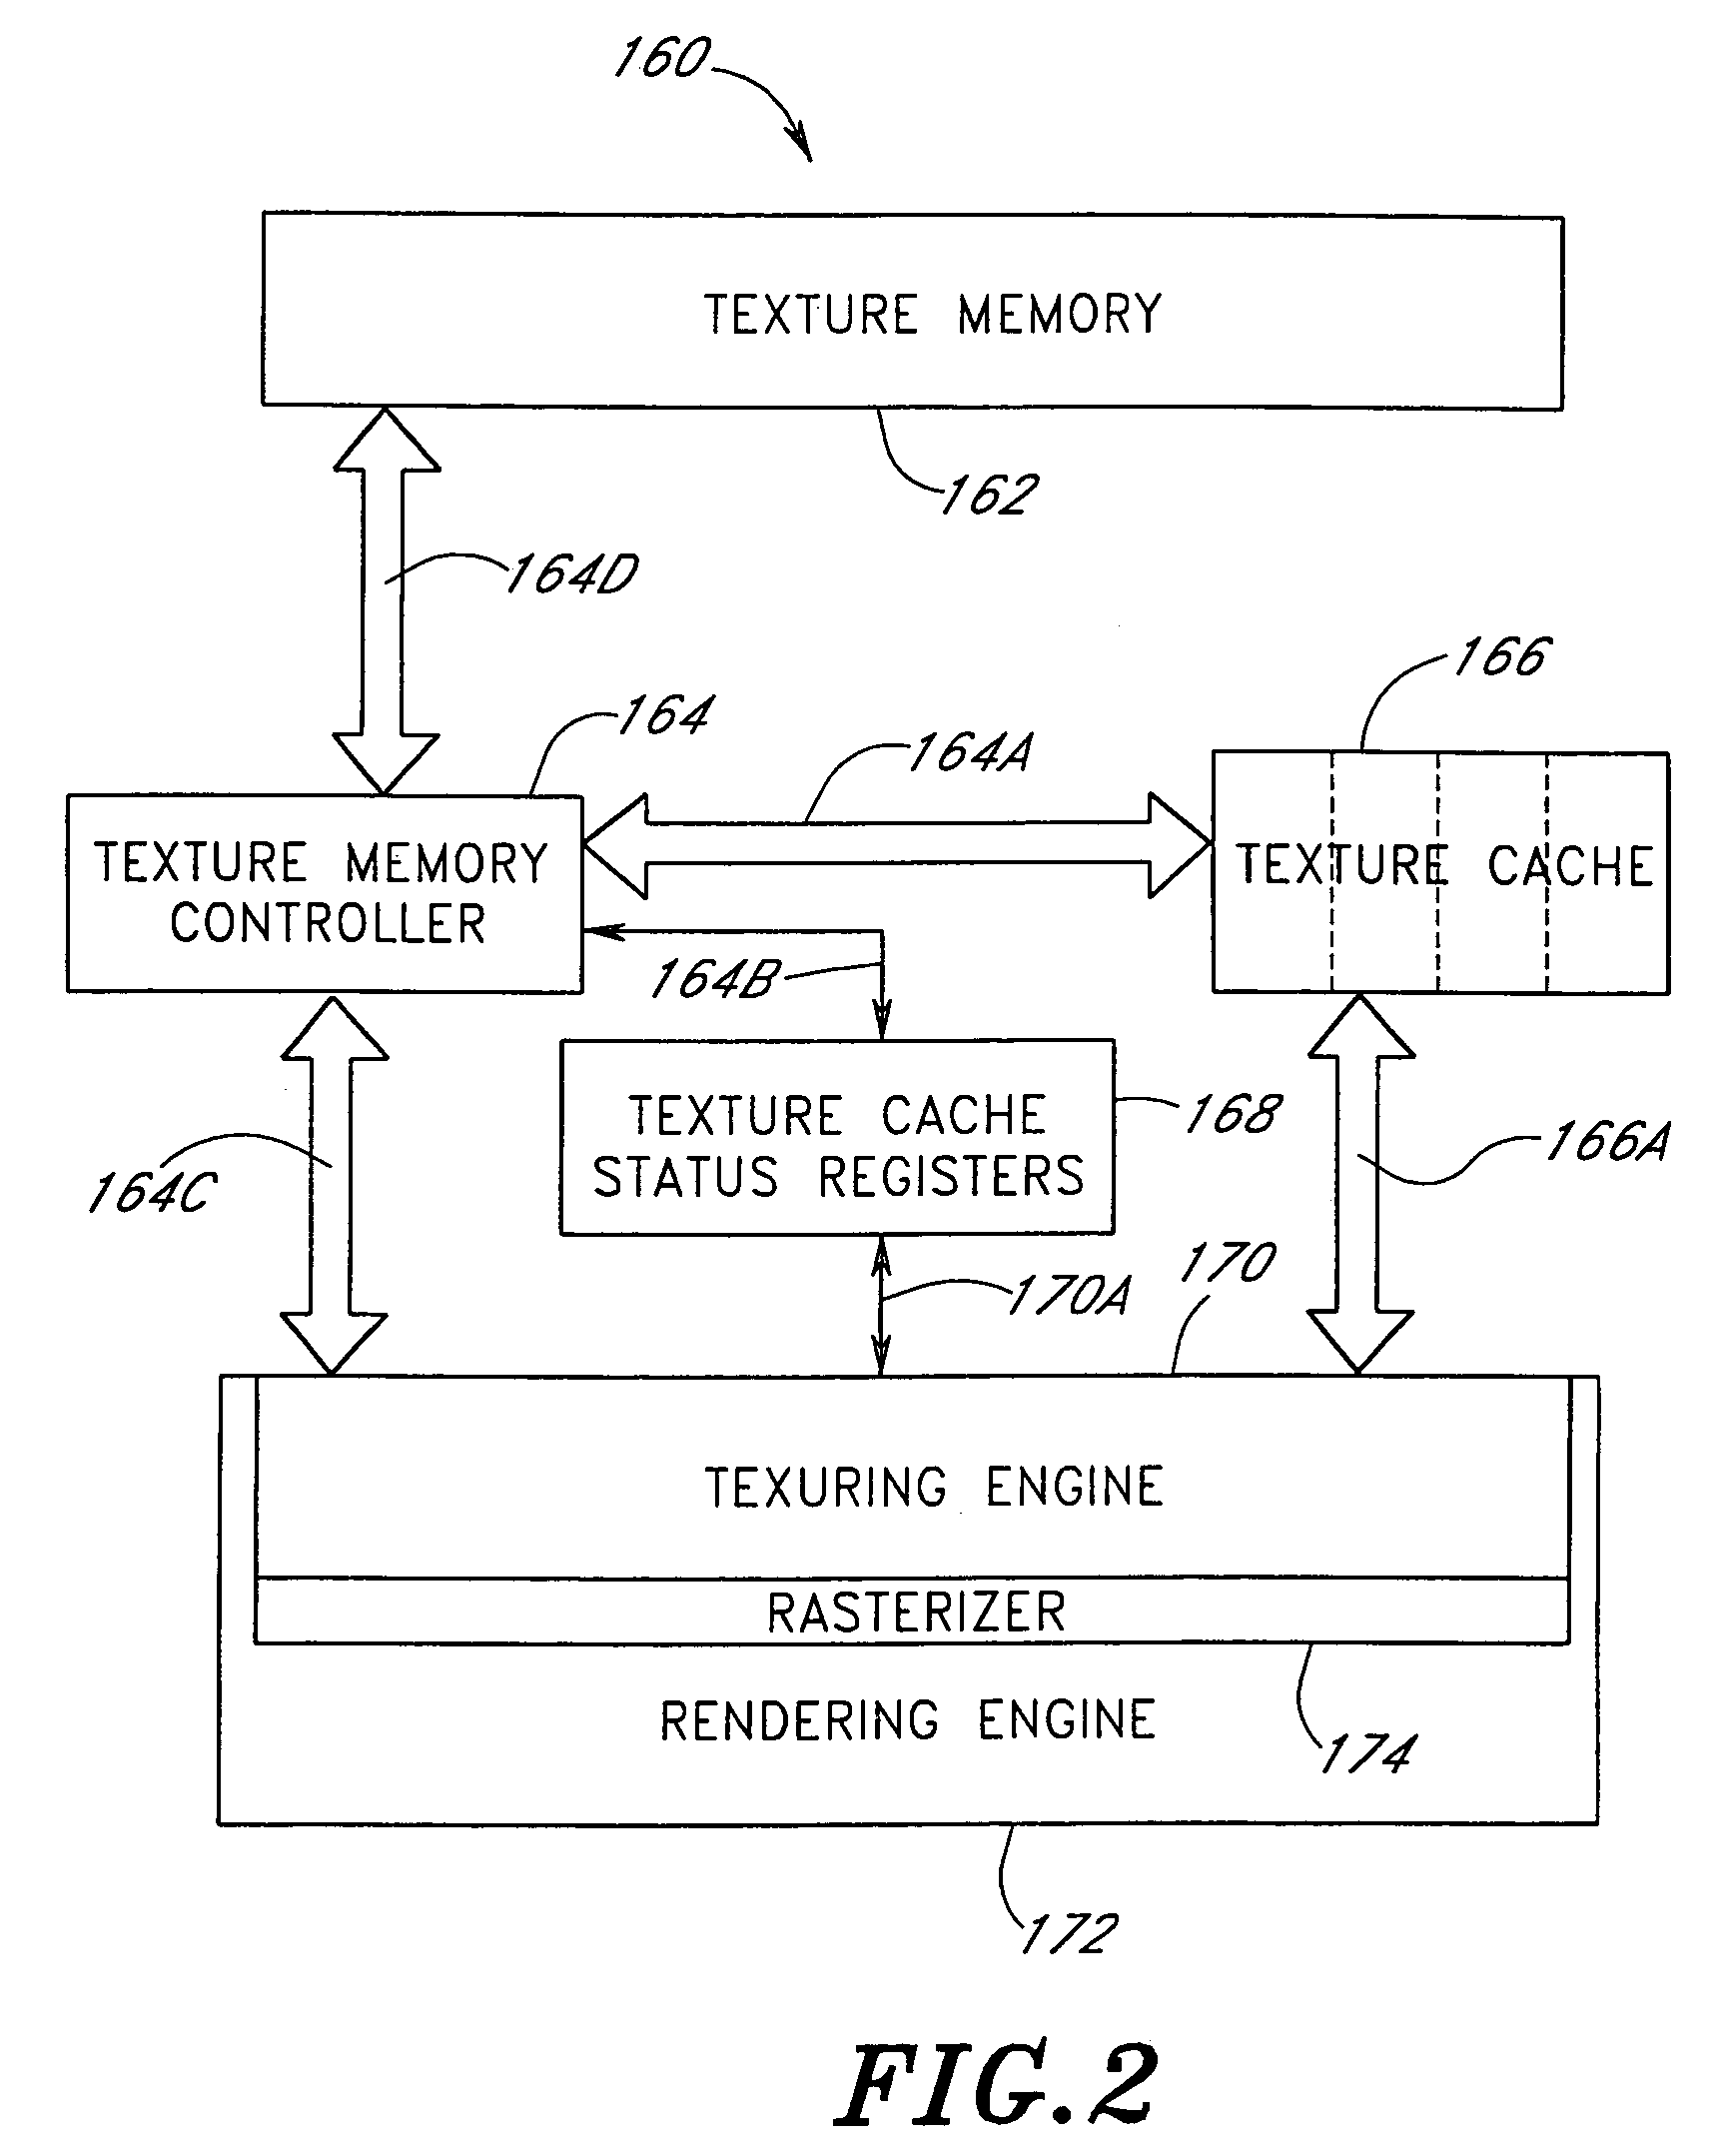 Method and system for texturing